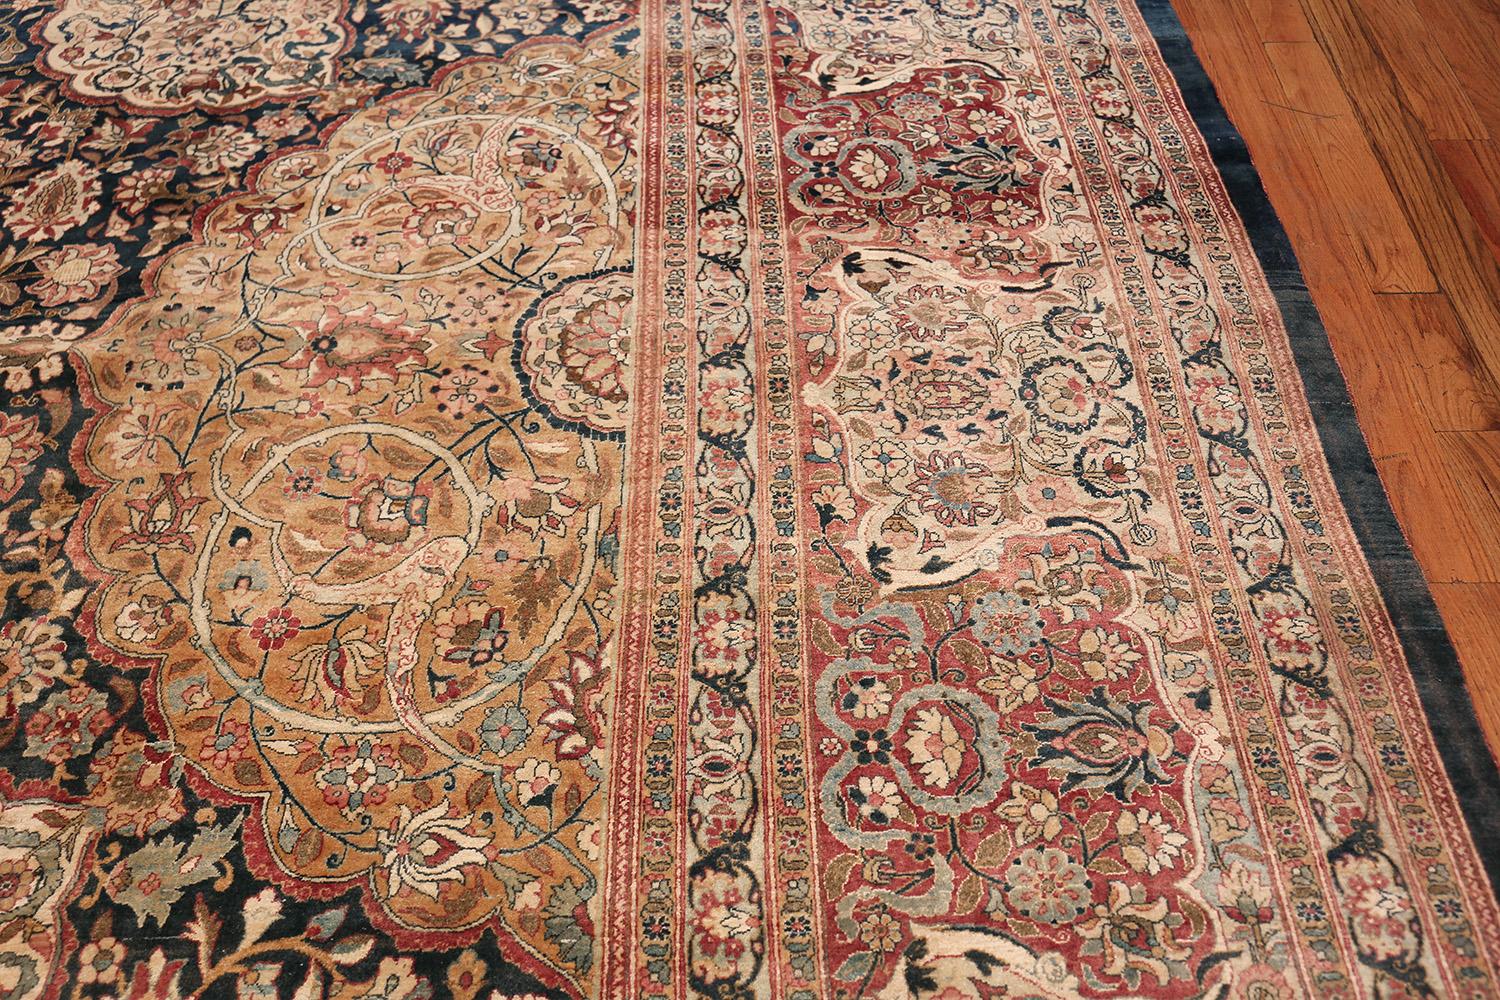 Hand-Knotted Oversized Antique Tehran Persian Carpet. Size: 14 ft 3 in x 22 ft 3 in